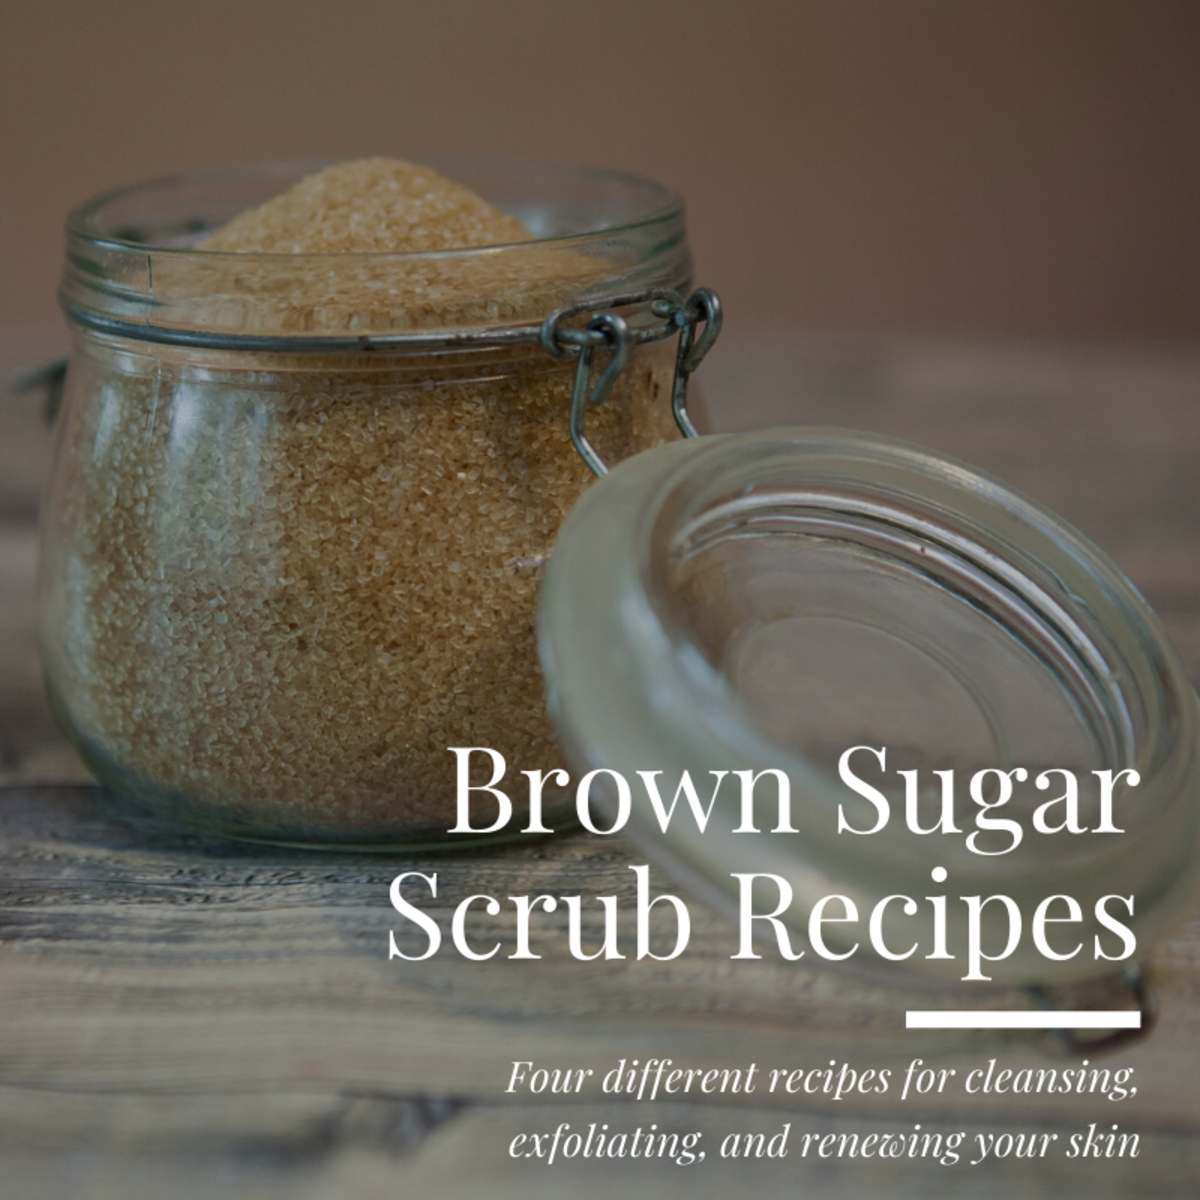 These four brown sugar scrubs will leave your skin feeling cleansed, exfoliated, softened, and renewed.